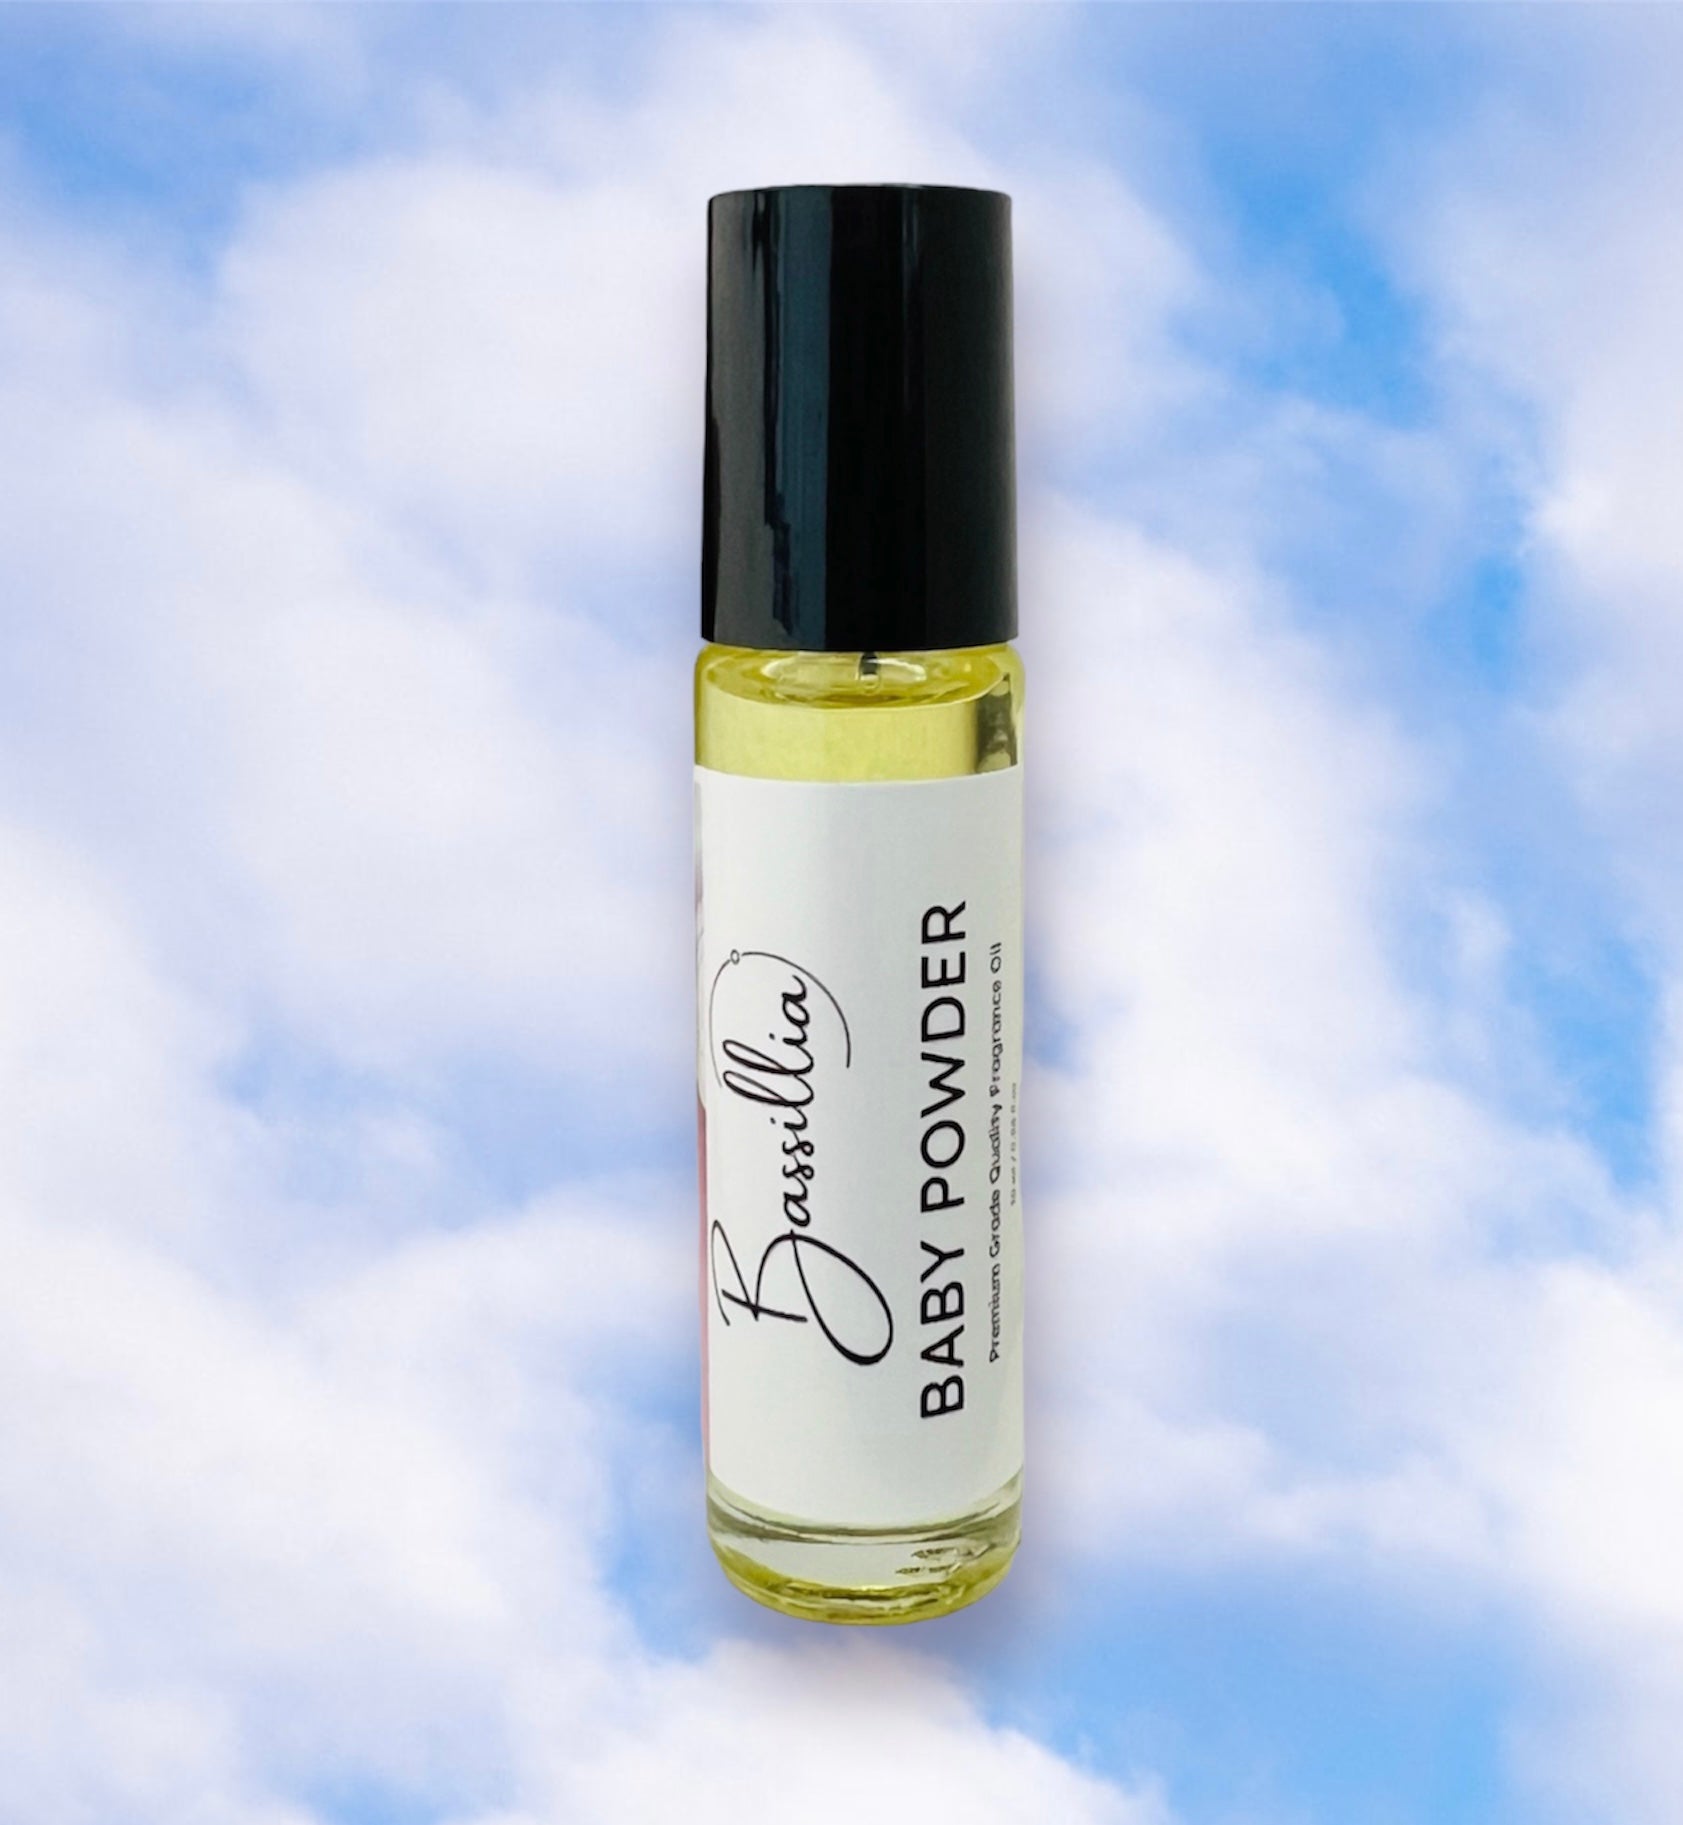 Bargz Baby Powder Oil  Buy Our Baby Powder Scented Oil Online from  BargzOils – BargzNY